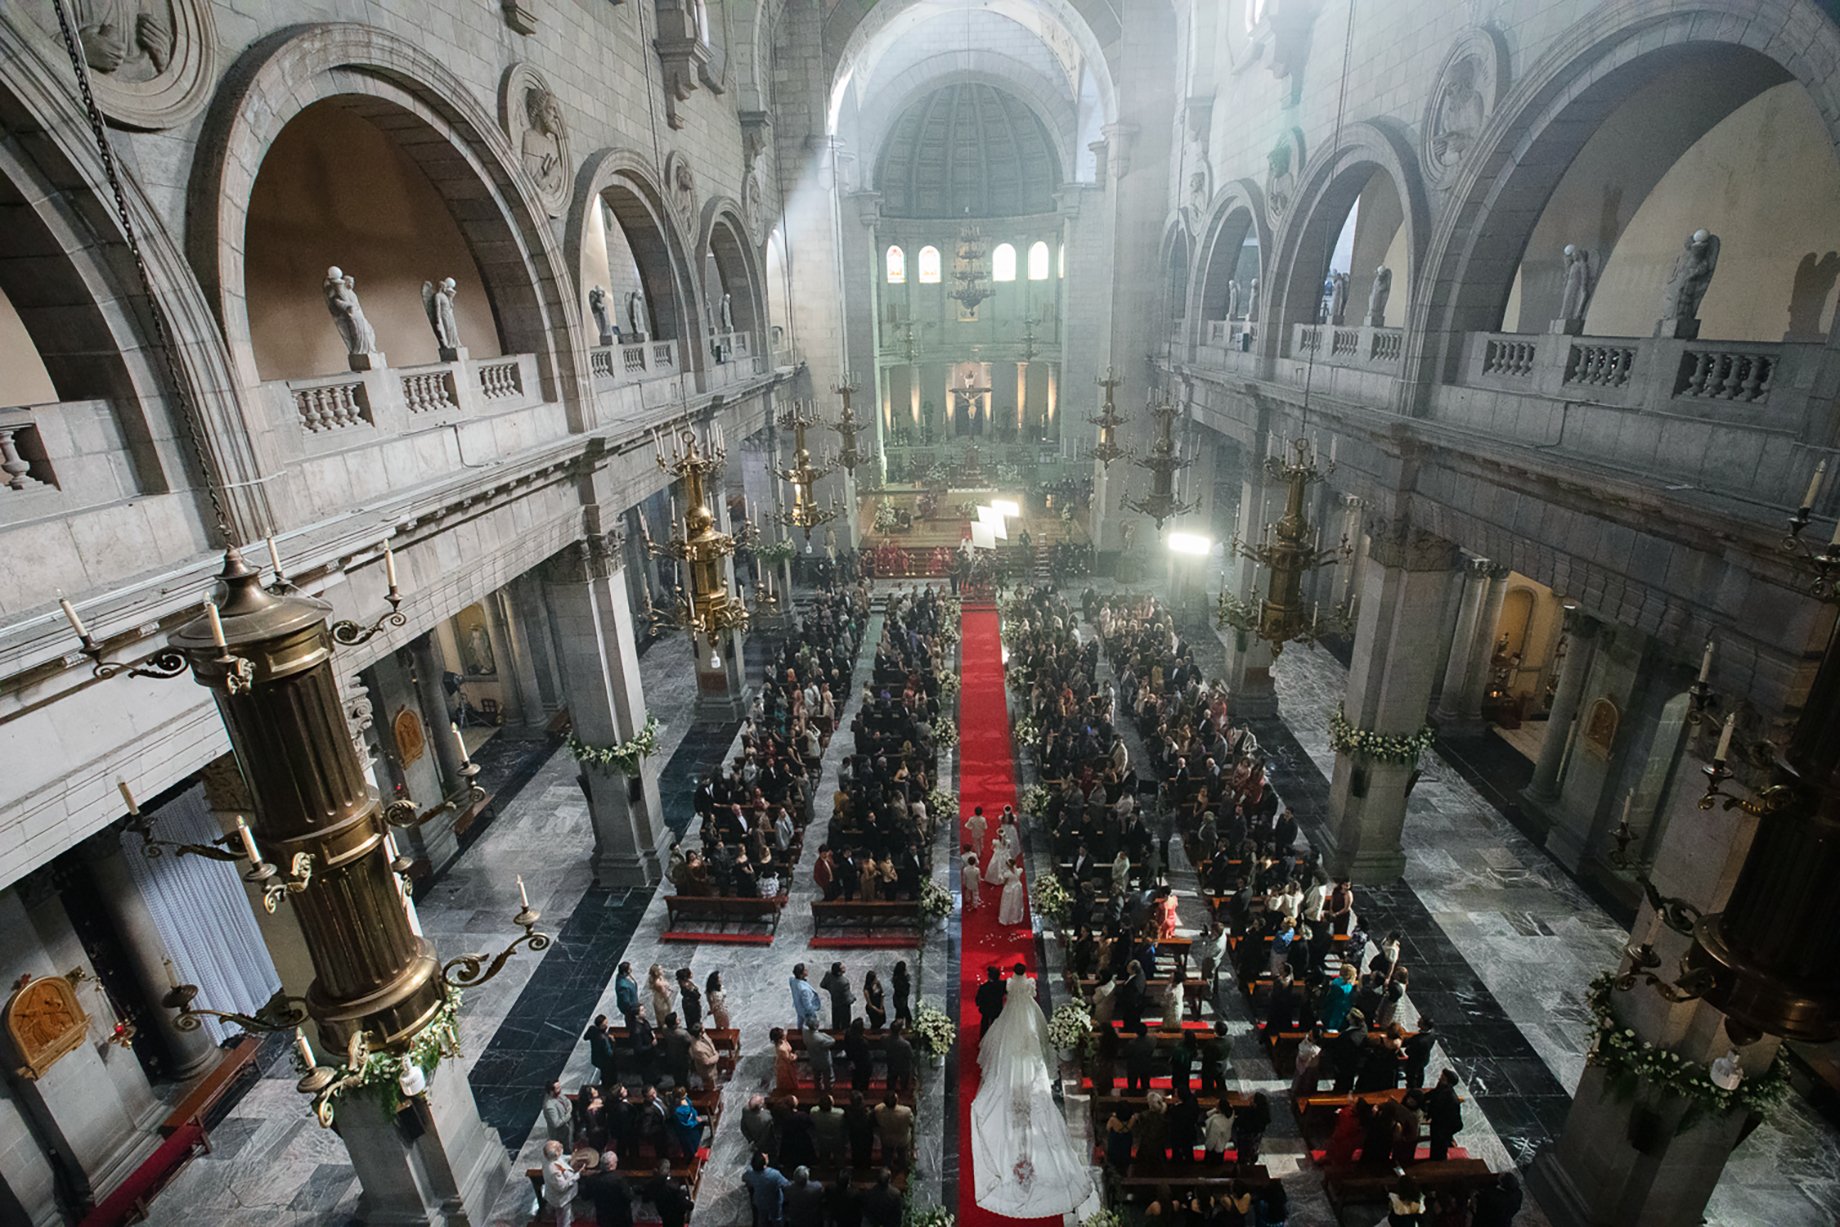 Wedding filmed in Cathedral de San Jose in Toluca, Mexico for Narcos: Mexico season 3 shot by Nicole Franco for Netflix